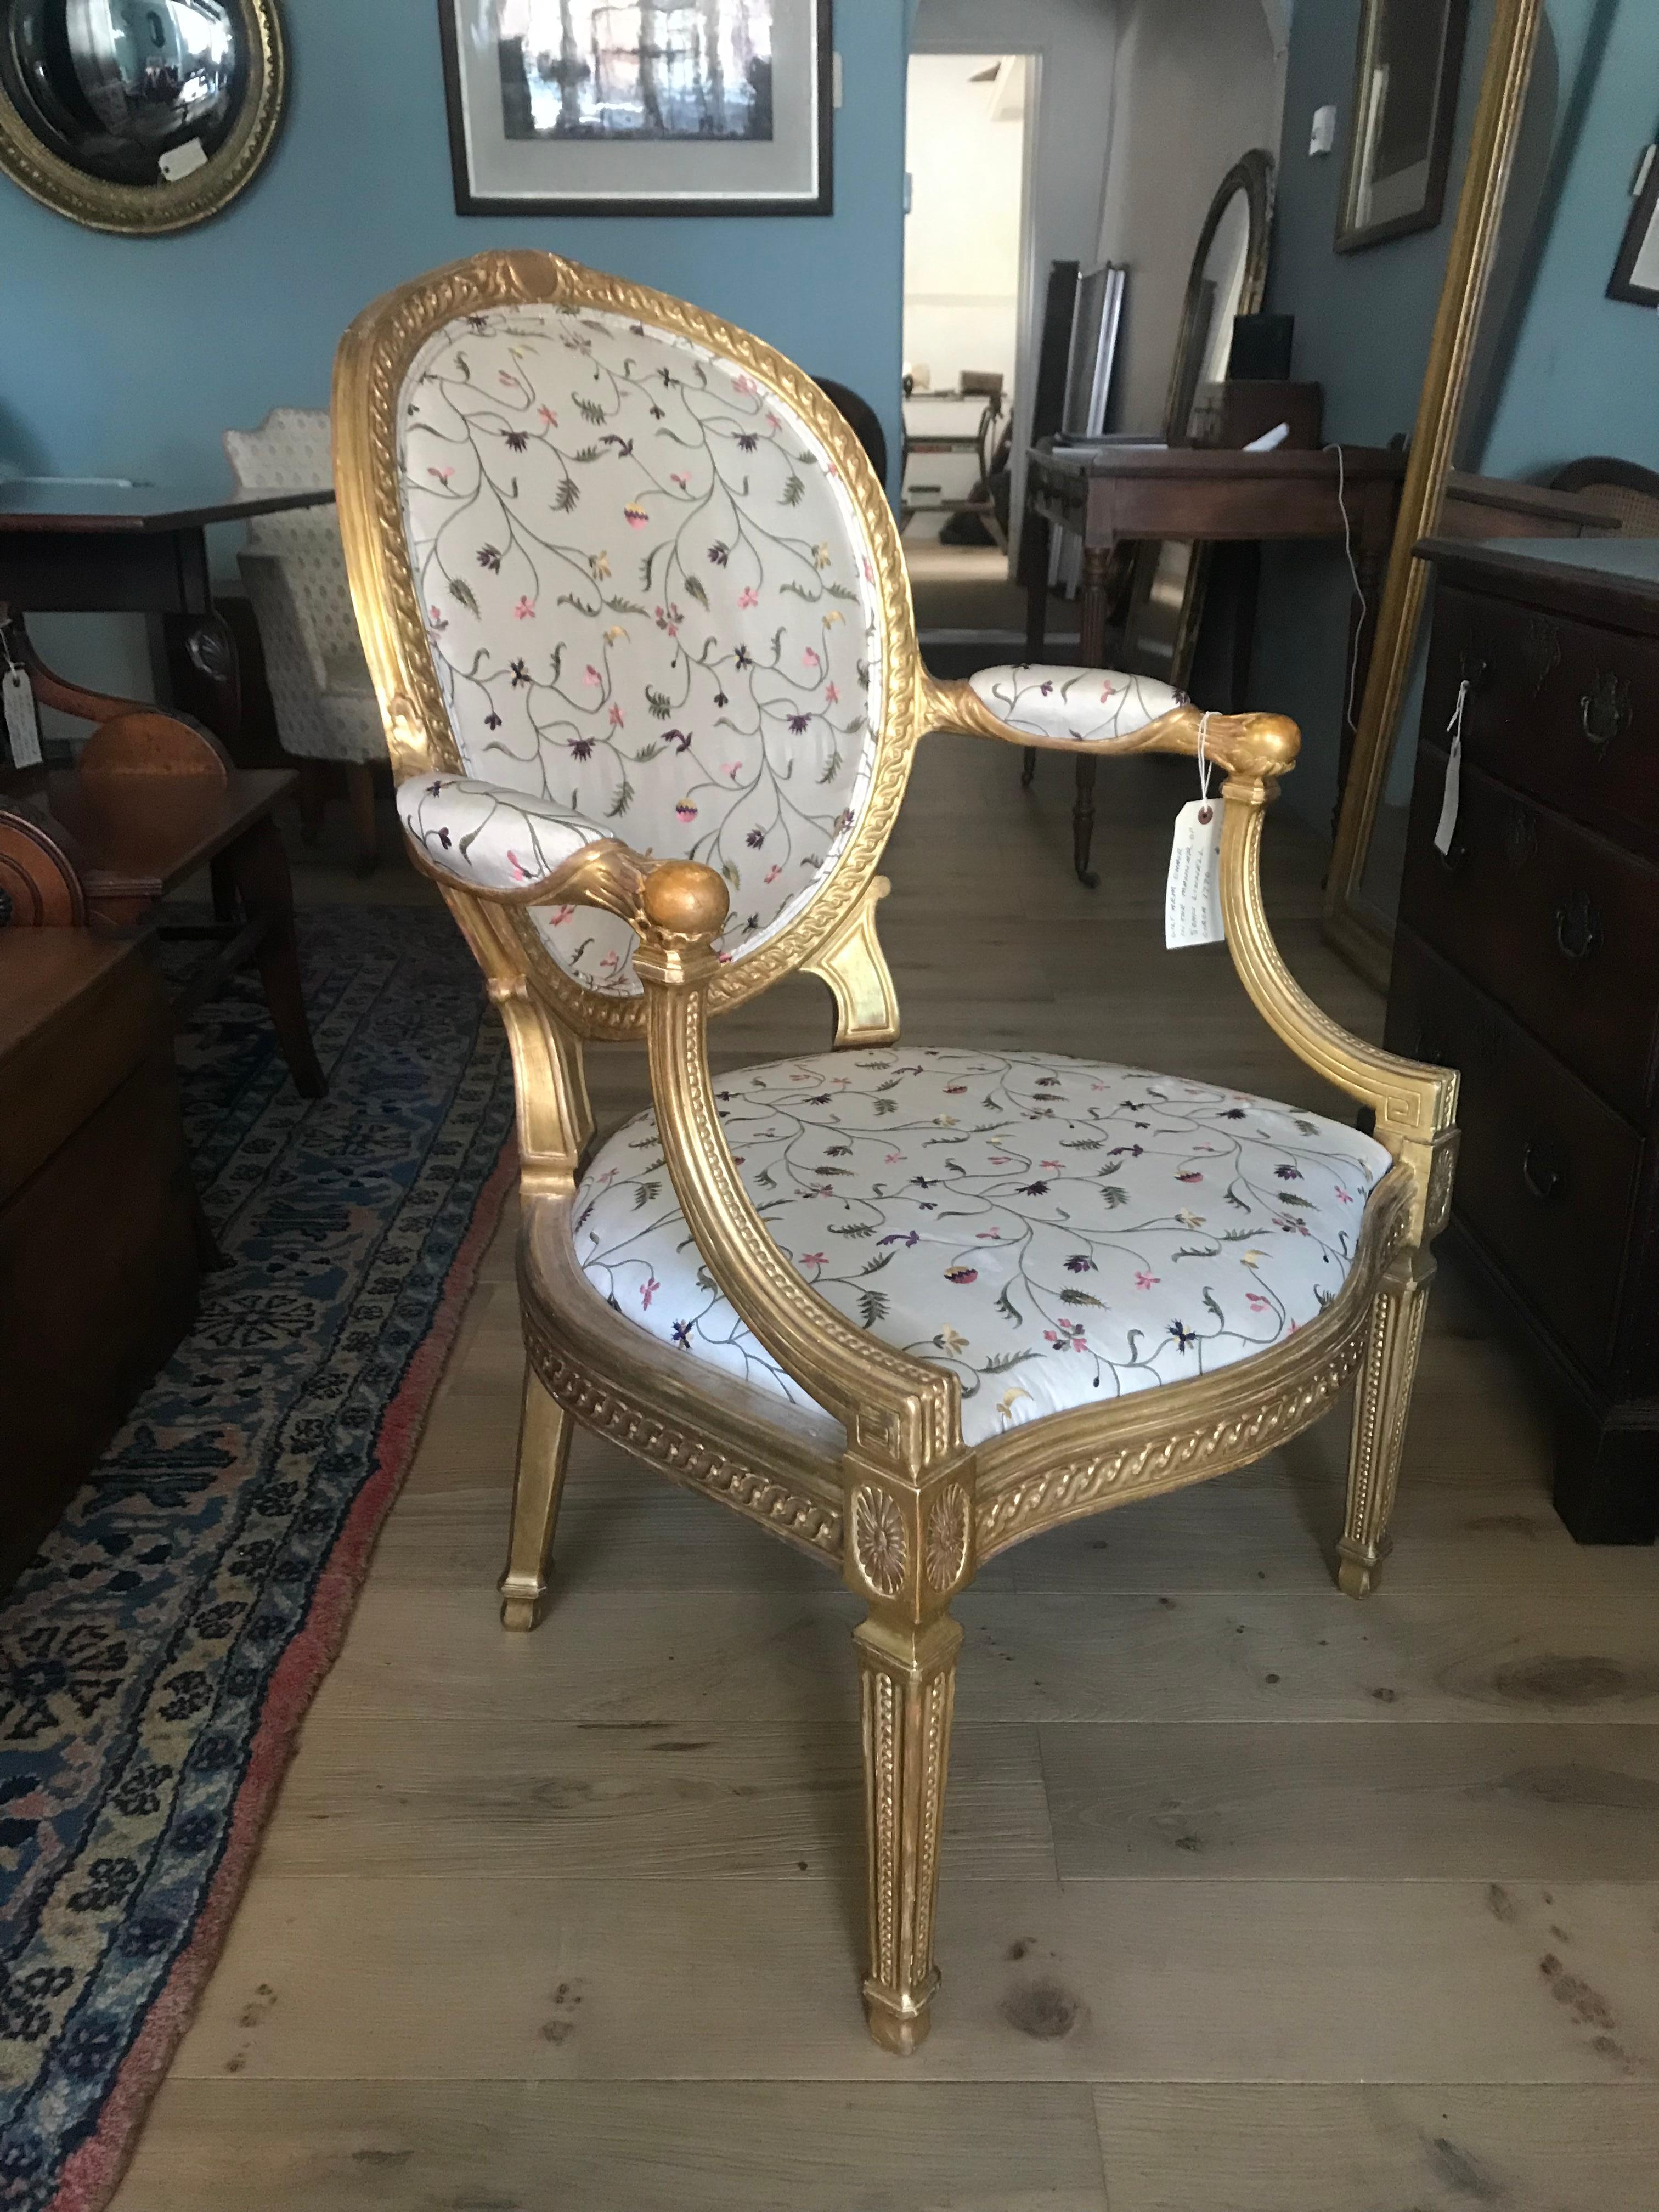 This stunning gilt armchair is in the manner of John Linnell, circa 1770.
The back is oval padded with attractive upholstery, framed with guilloche carving, the chair rails feature the same design. The arms are classic Linnell design, the ball